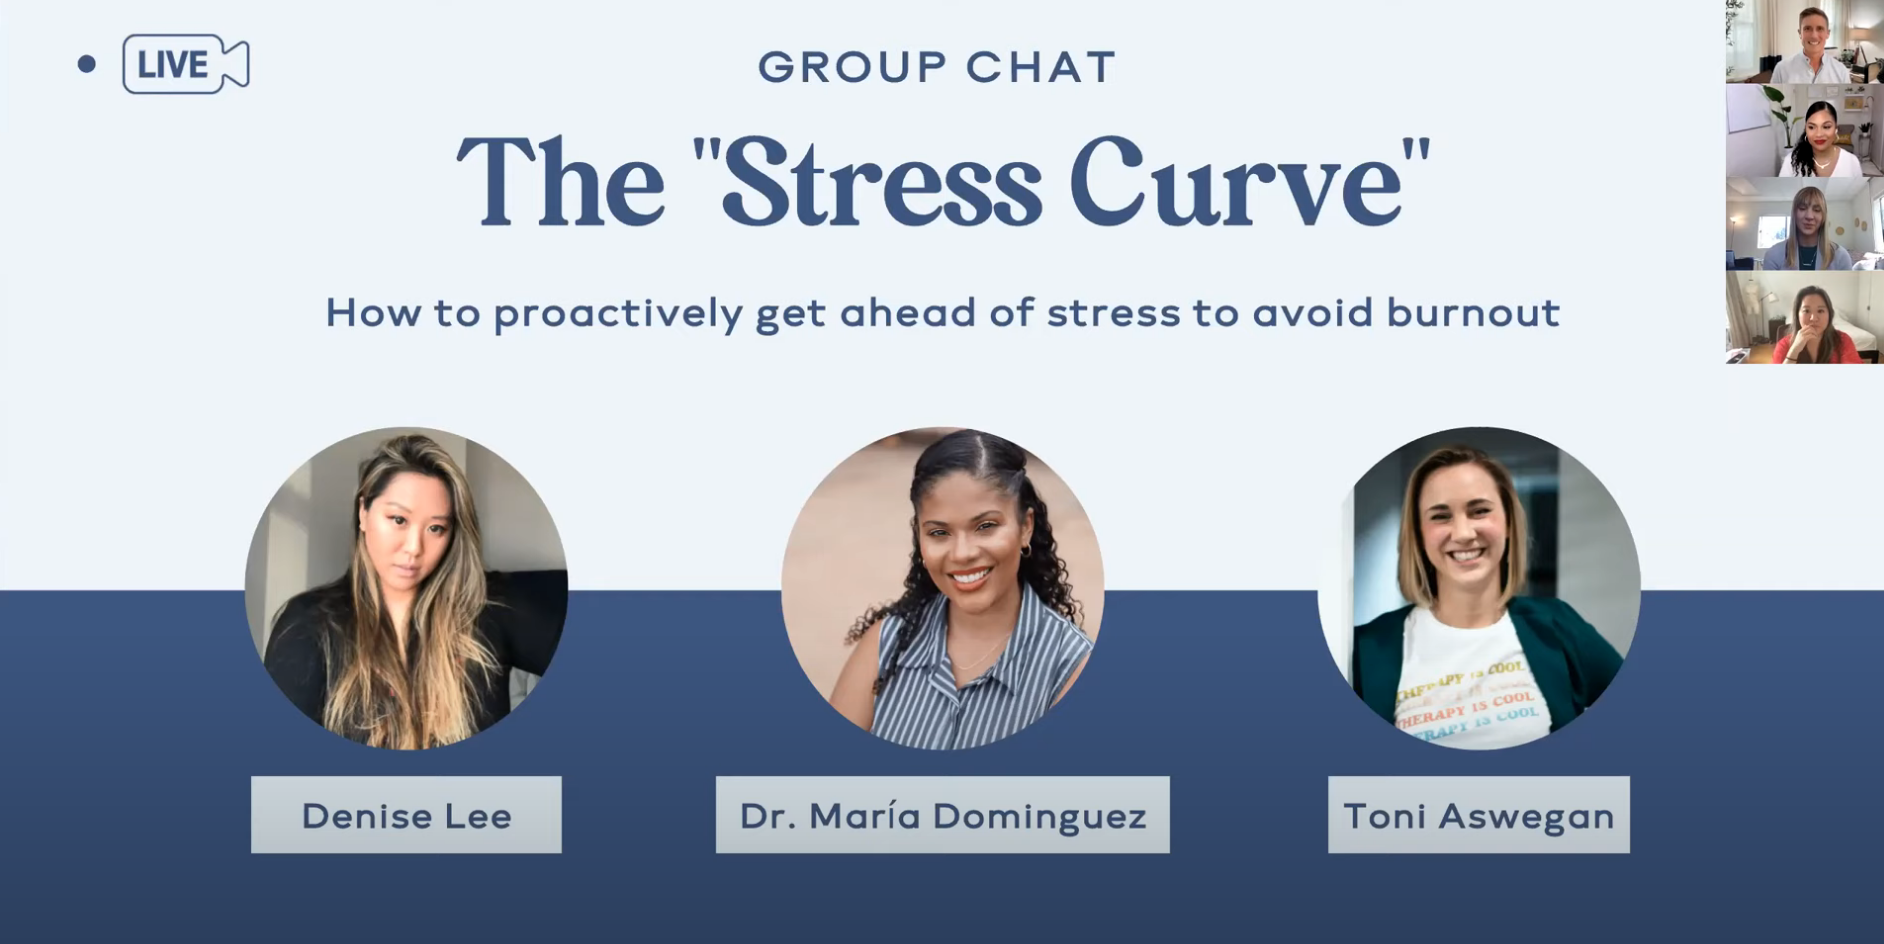 Load video: Group Chat: The Stress Curve - How to proactively get ahead of stress to avoid burnout